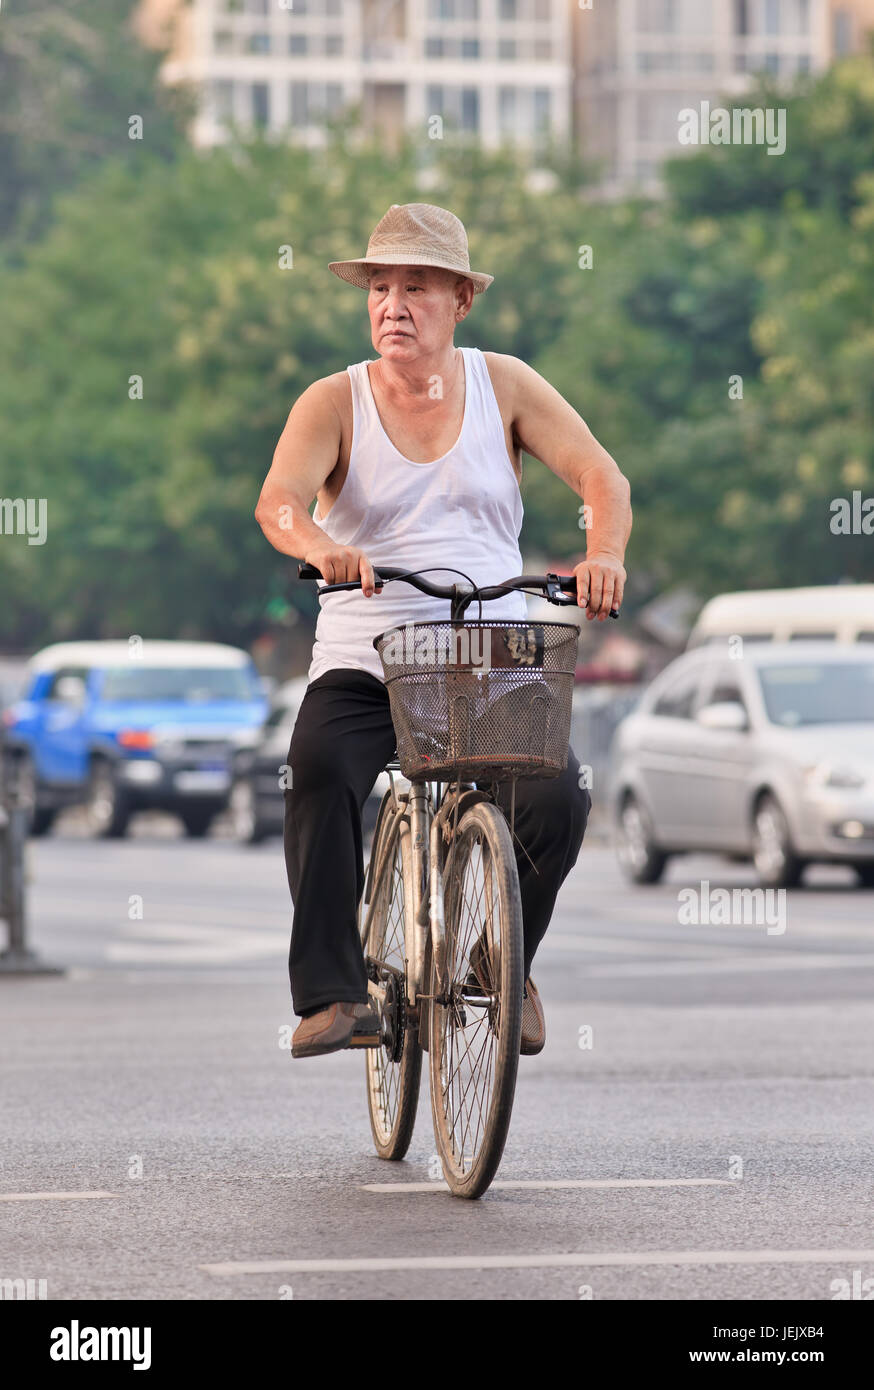 BEIJING-JULY 27, 2015. Male senior on rusty bike. China’s elderly population (60 years + older) is currently 128 million, one in every ten people. Stock Photo